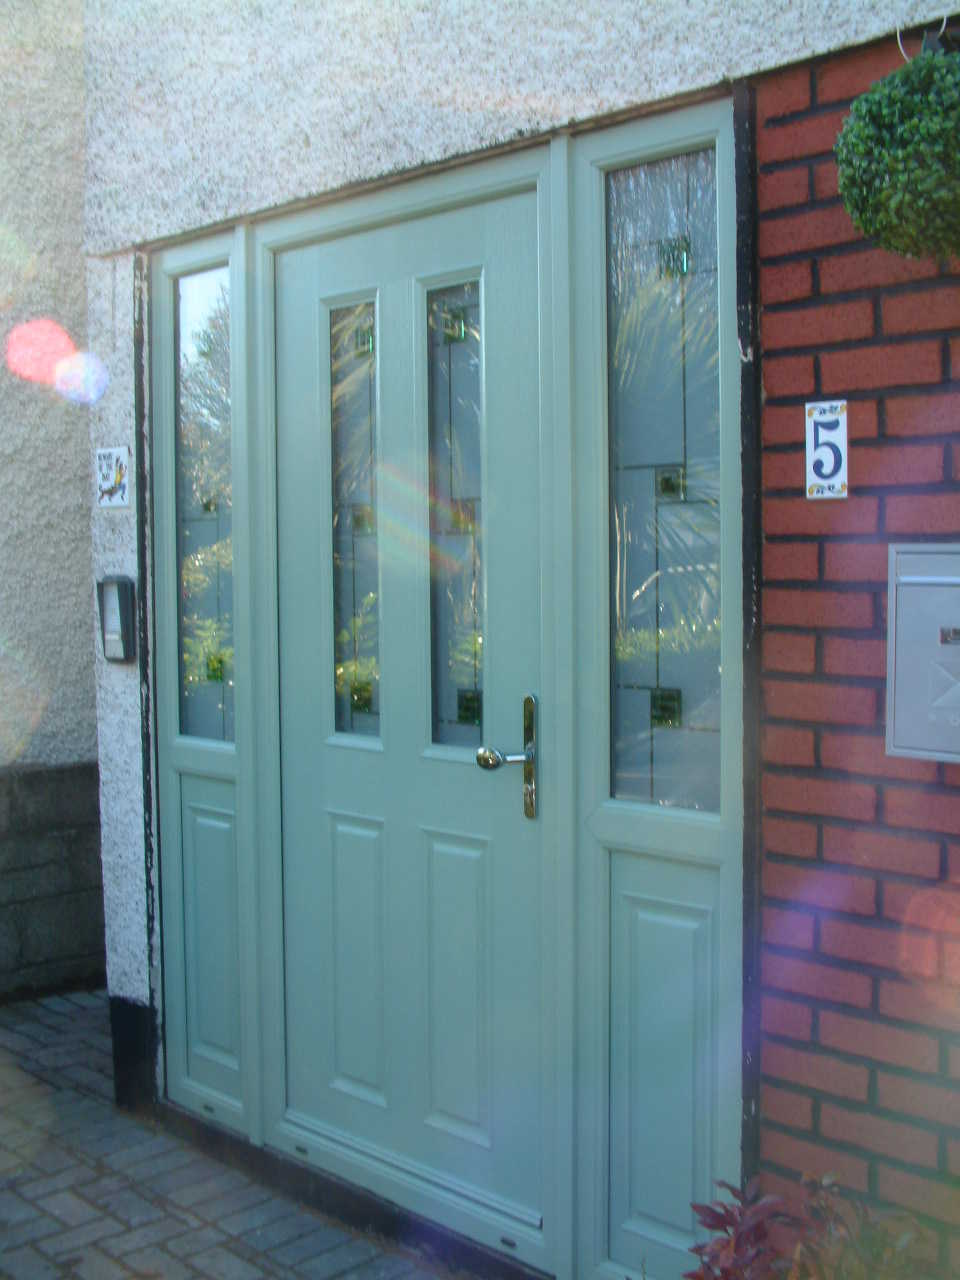 CHARTWELL GREEN APEER APM2 COMPOSITE DOOR FITTED BY ASGARD WINDOWS IN DUBLIN 24.